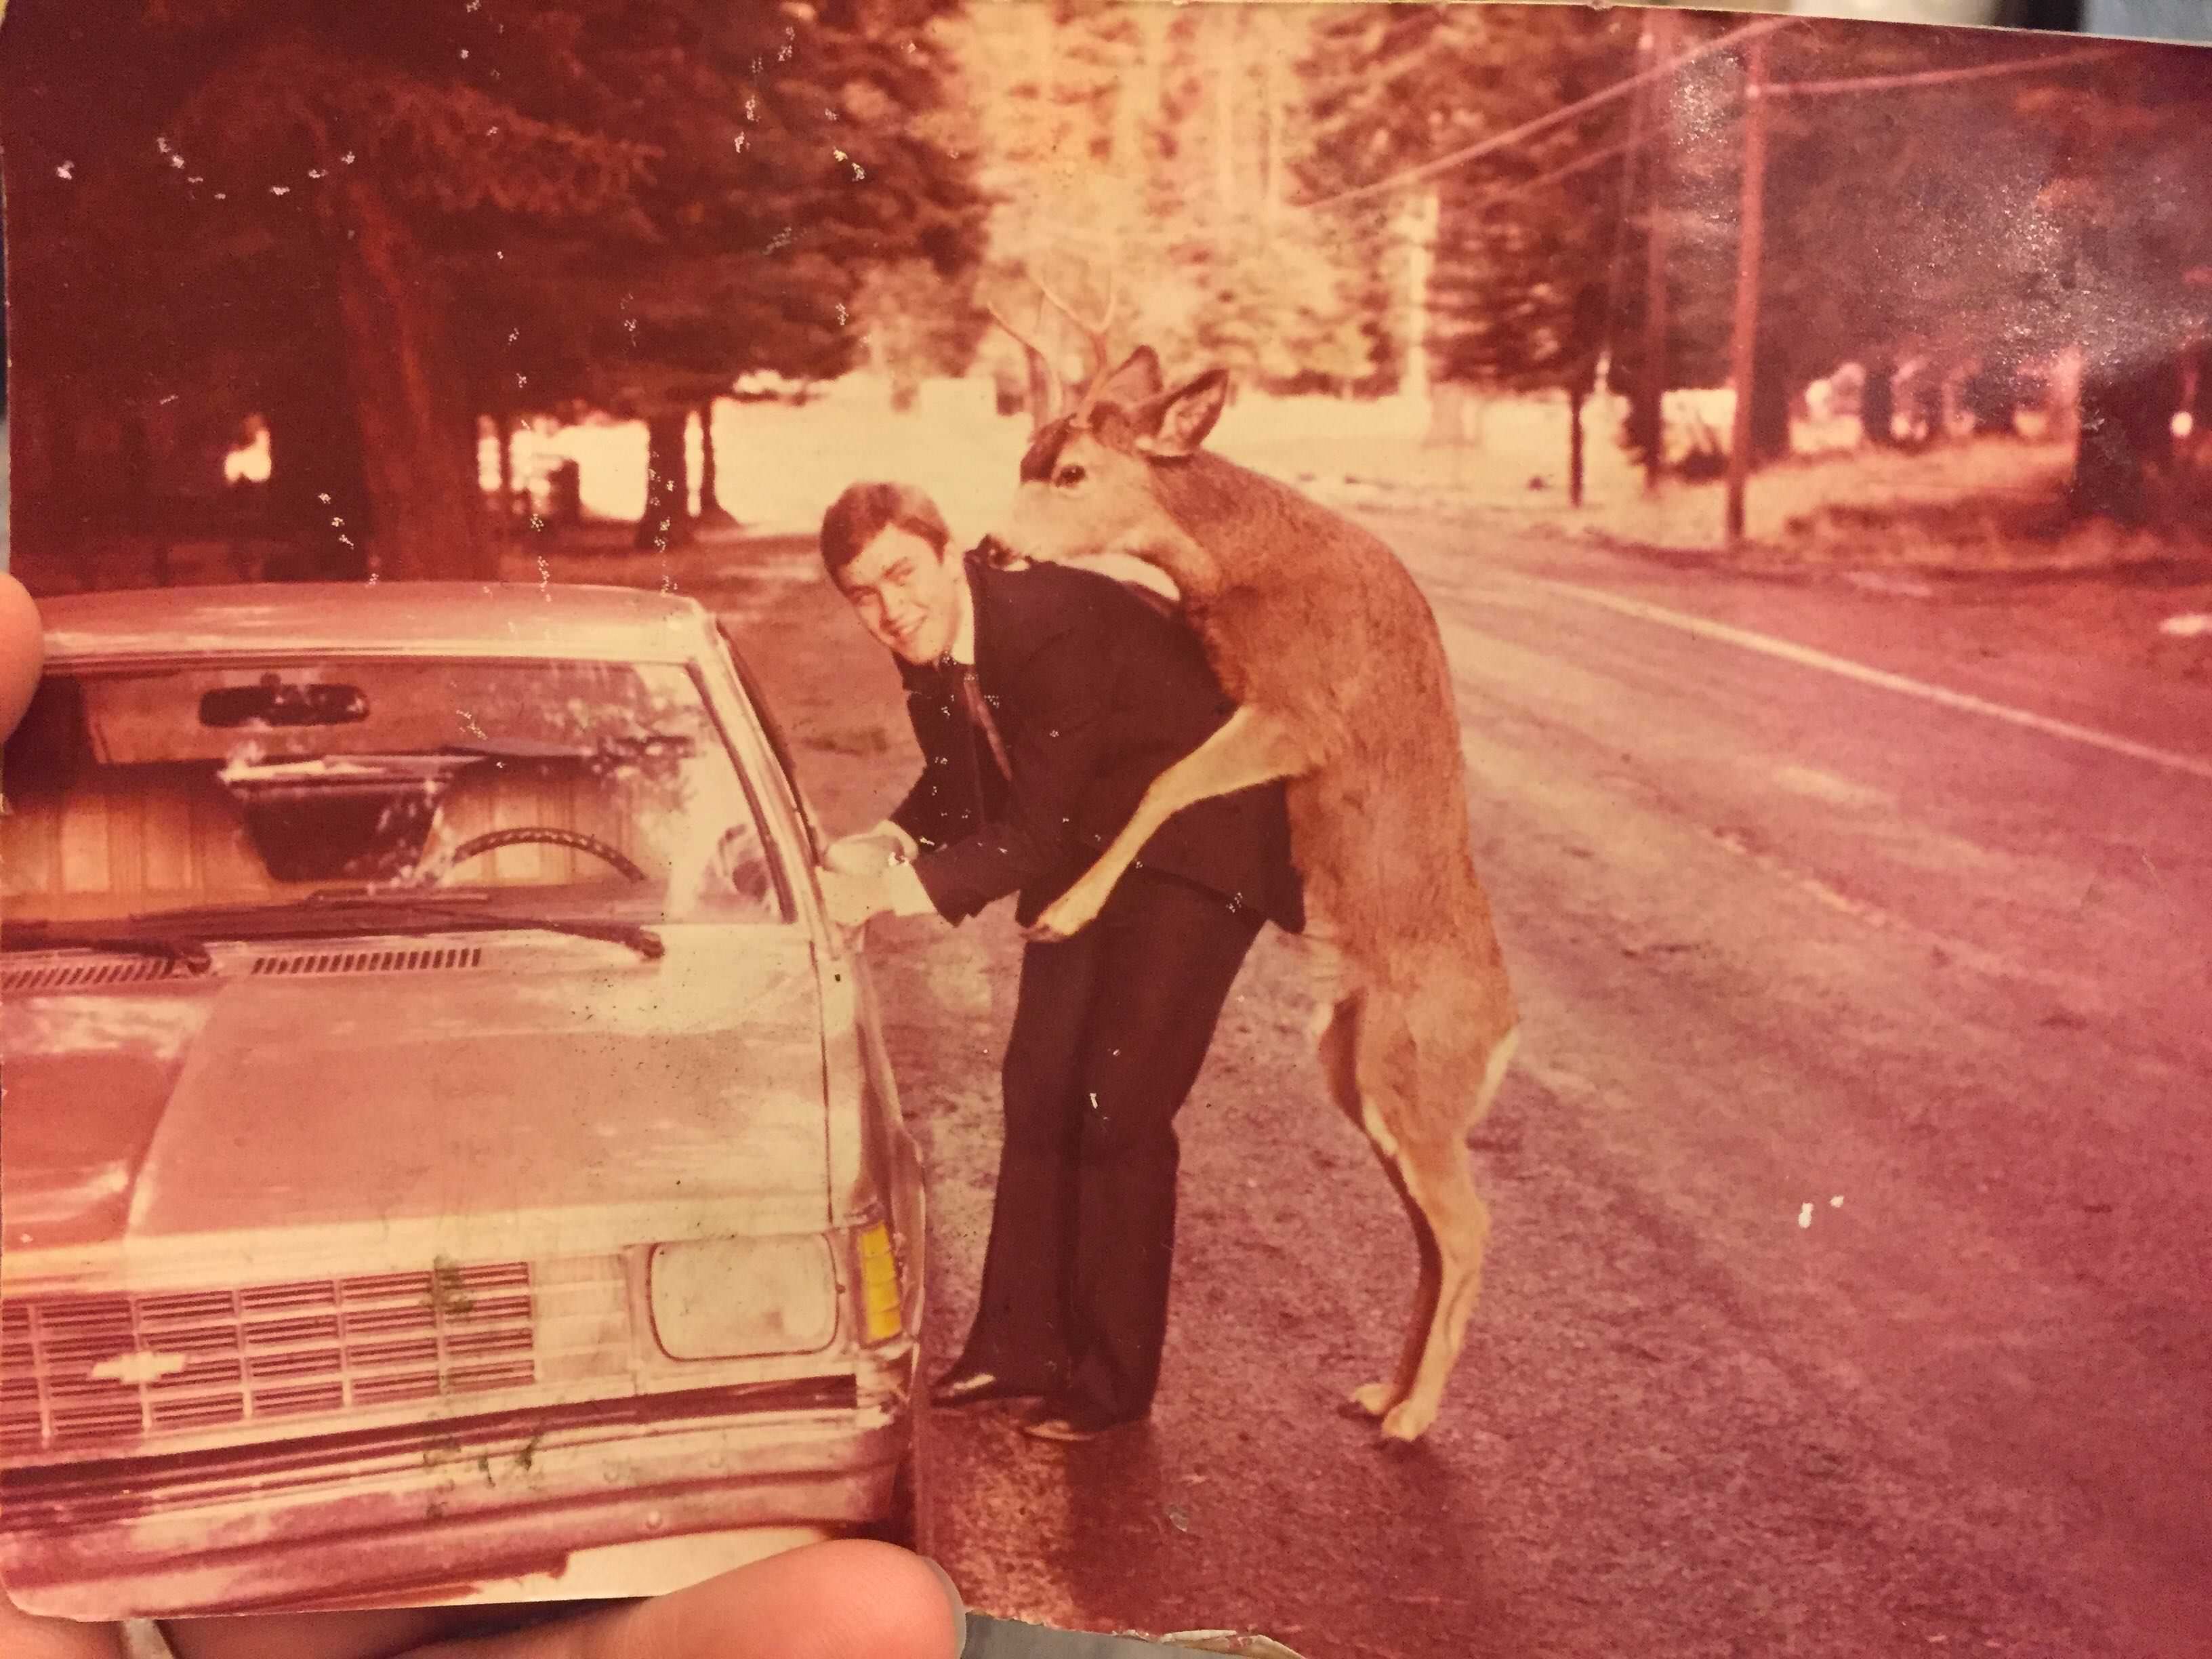 This happened unexpectedly to my dad's friend in Idaho circa 1980 while he was leaning into his car to get something